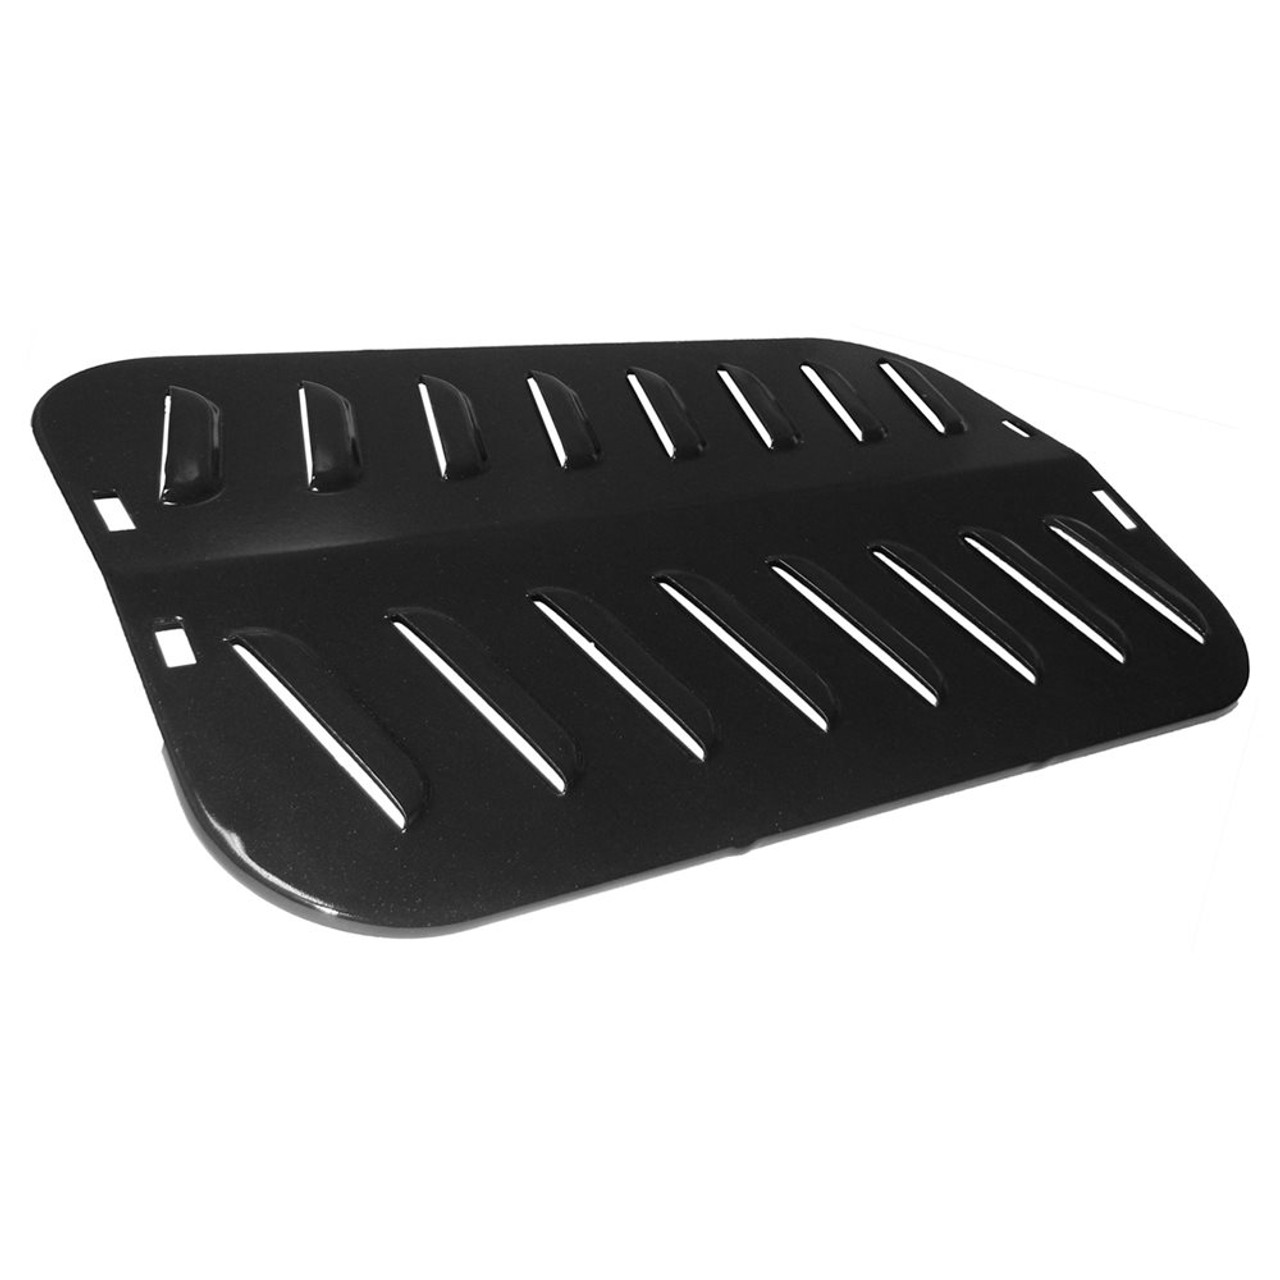 Gas Grill Steel Heat Tent Plate for 91731 Sunbeam Coleman Grills 